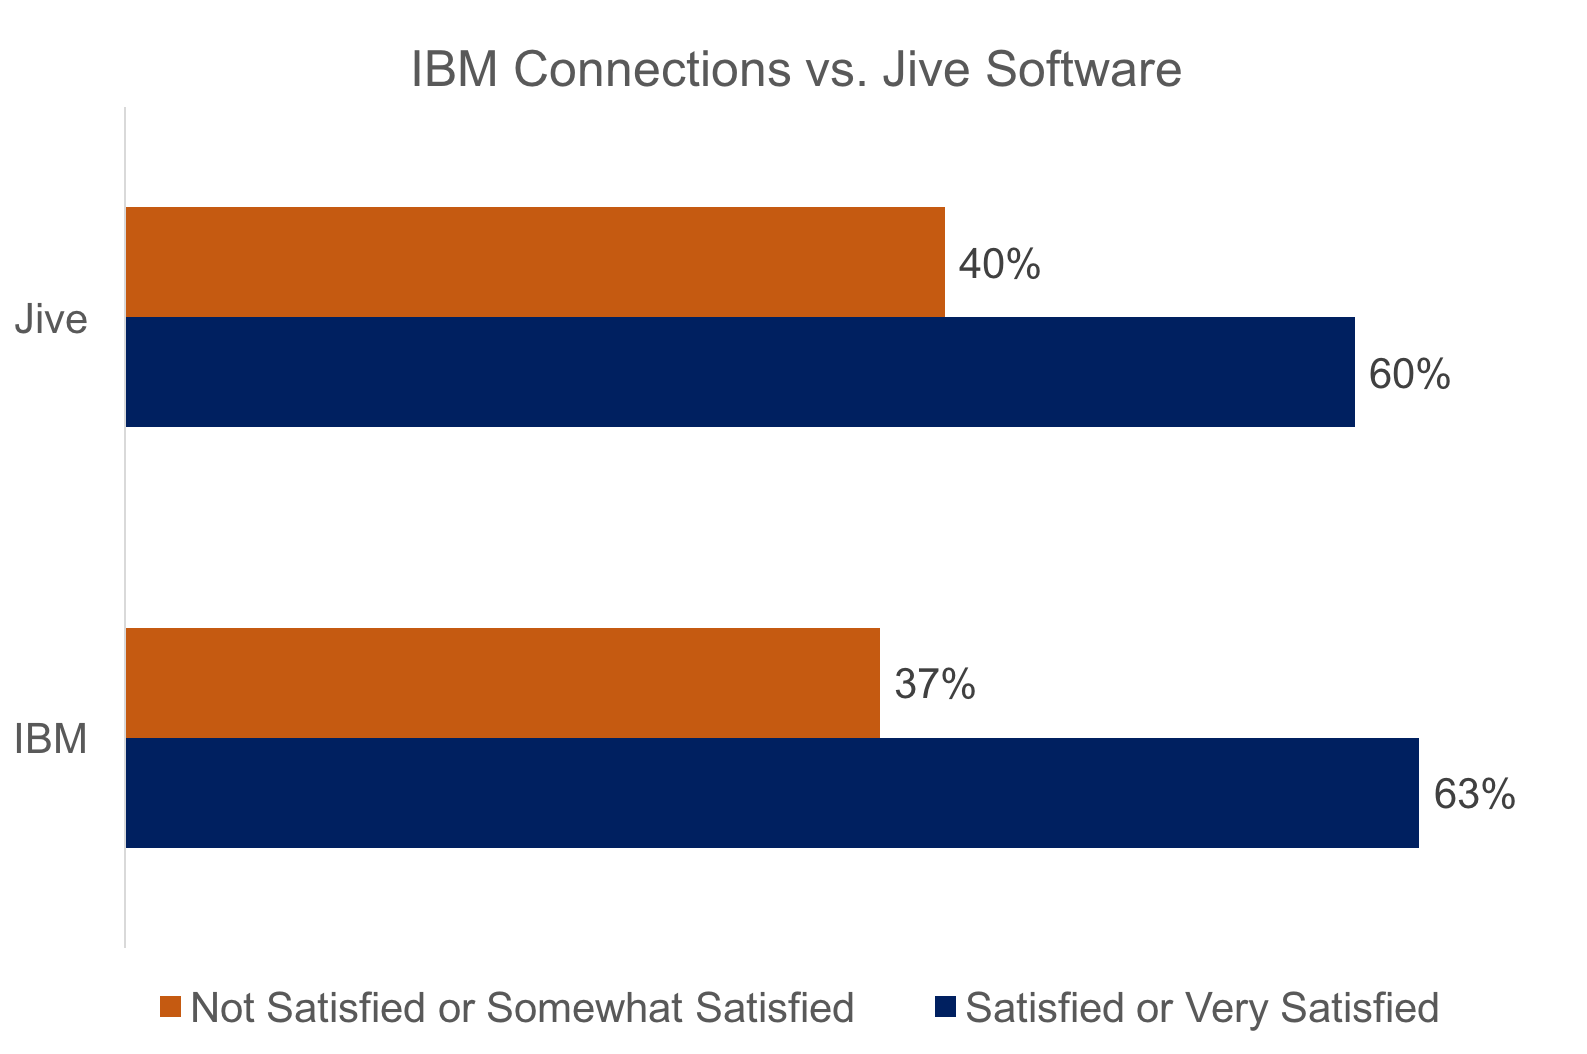 Customer Satisfaction ratings for IBM Connections and Jive Software